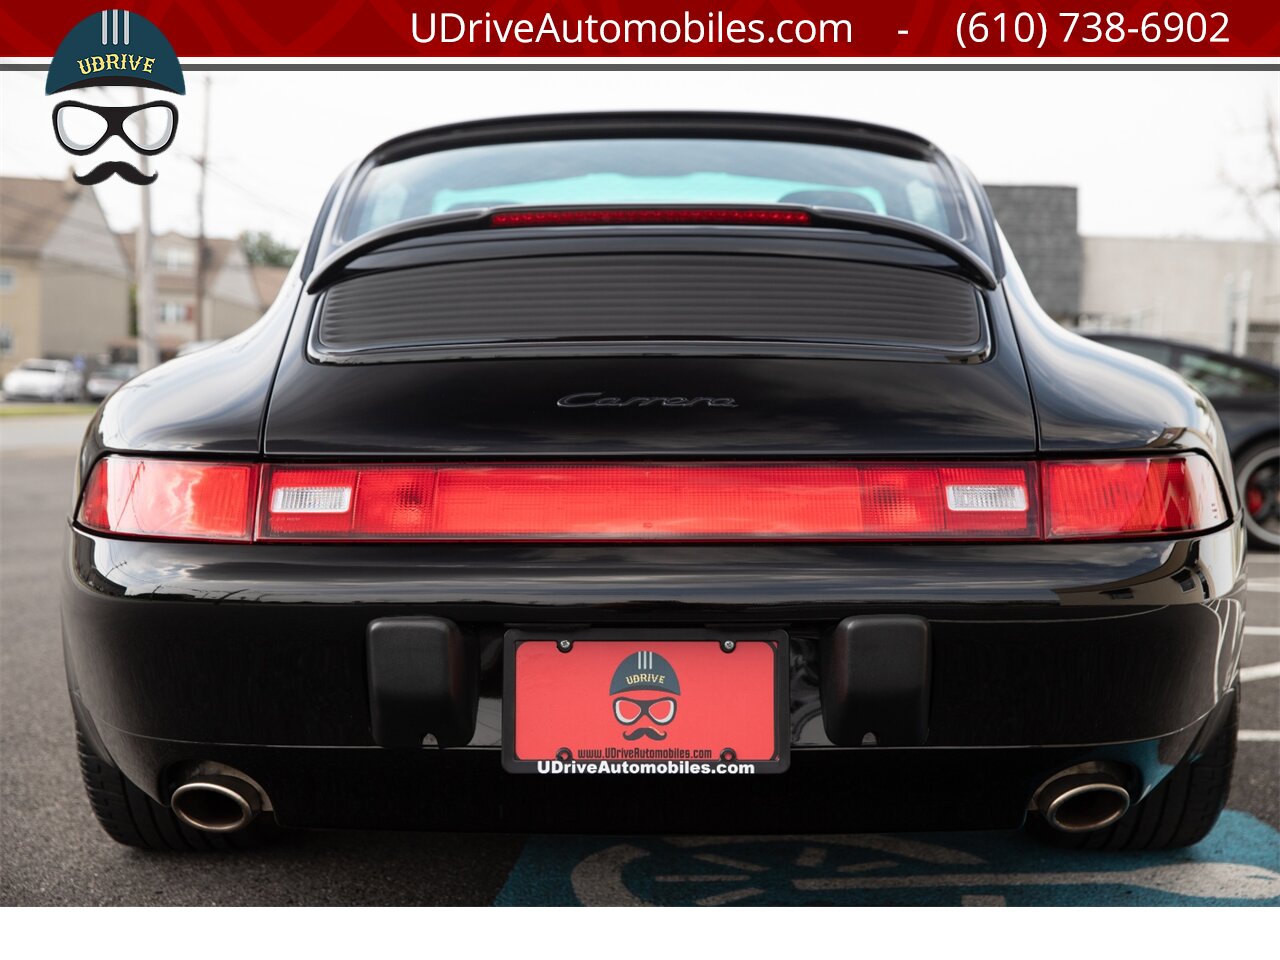 1995 Porsche 911 993 Carrera 6 Speed 16k Miles Service History  Black over Black Spectacular Stock Example 1 Owner Clean Carfax - Photo 19 - West Chester, PA 19382